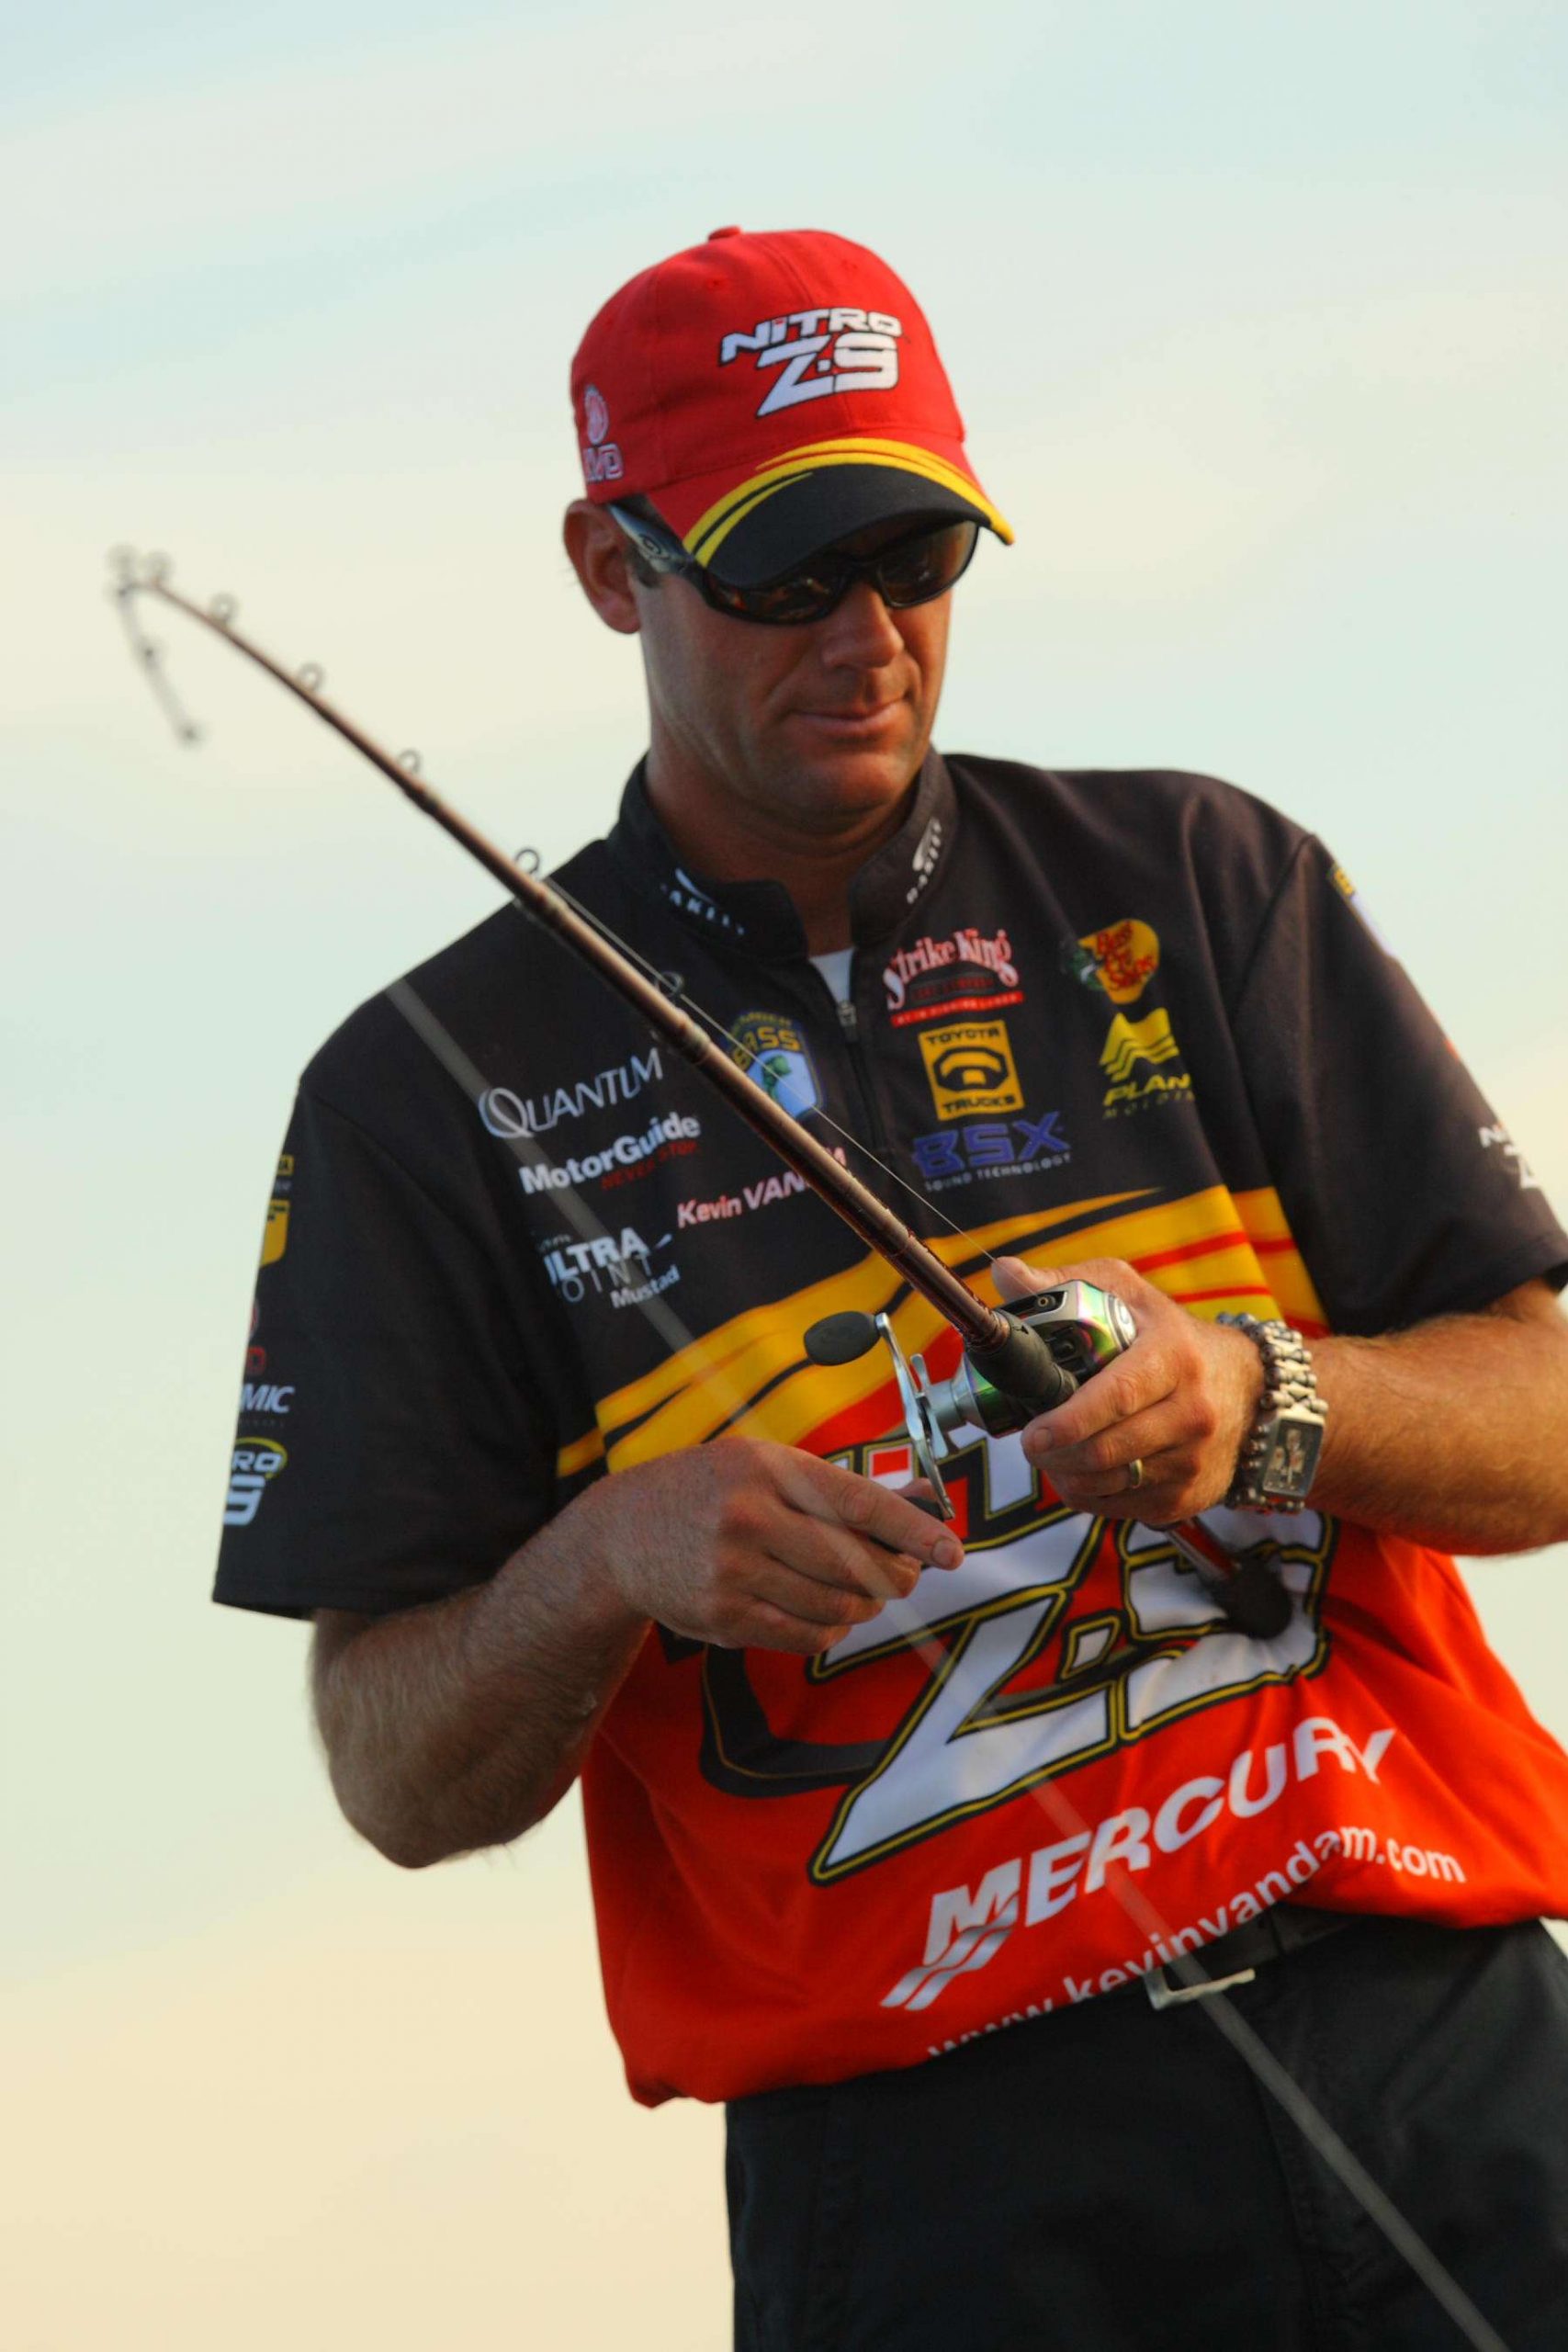 <b>2008</b><br>The 2008 season saw the start of an amazing run for Kevin VanDam, a dominance reminiscent of Roland Martin's in the 1970s. 